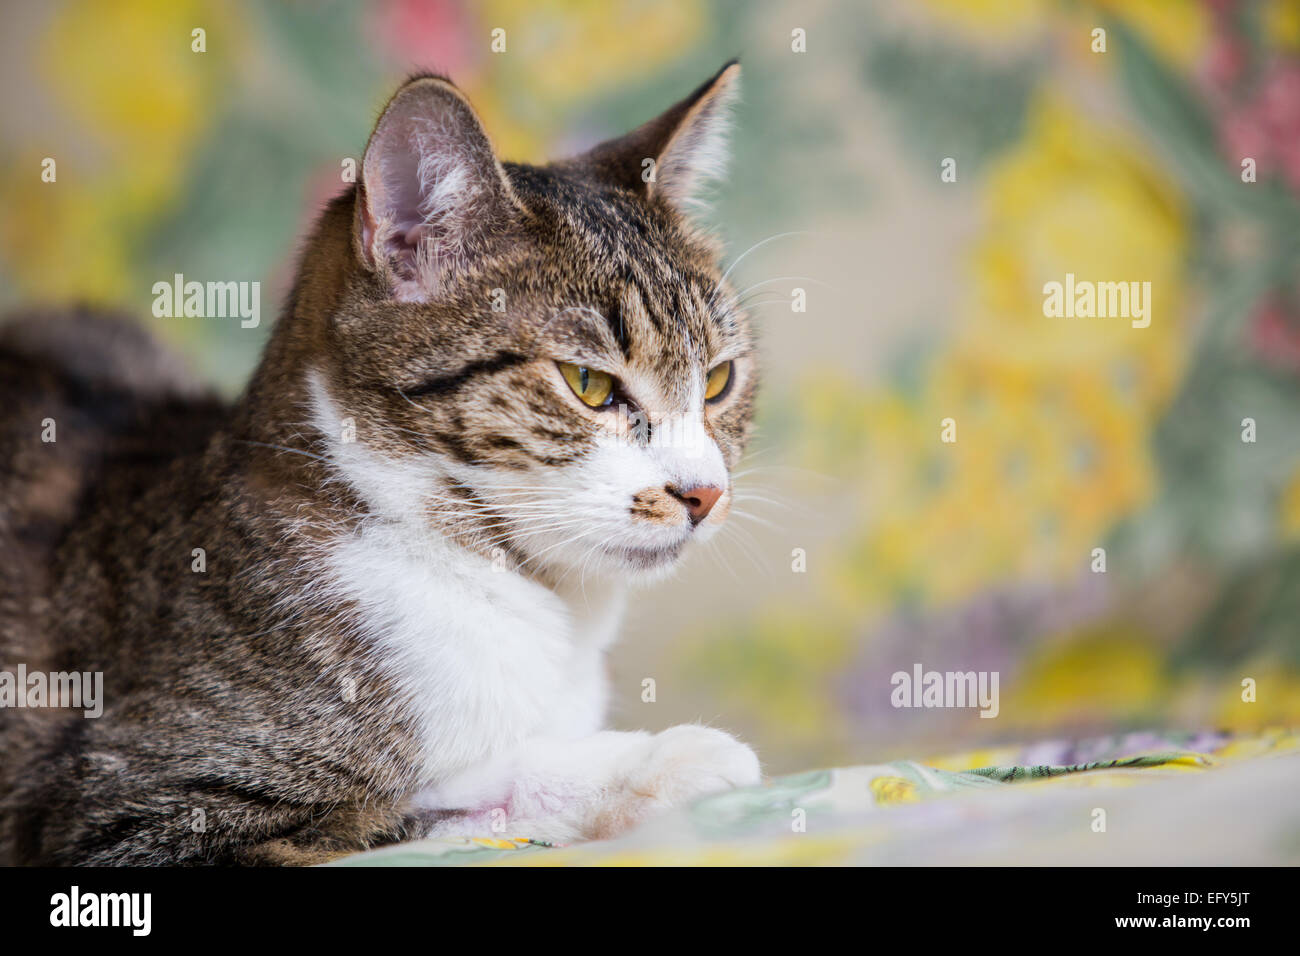 close up of lying tabby cat with green eyes Stock Photo